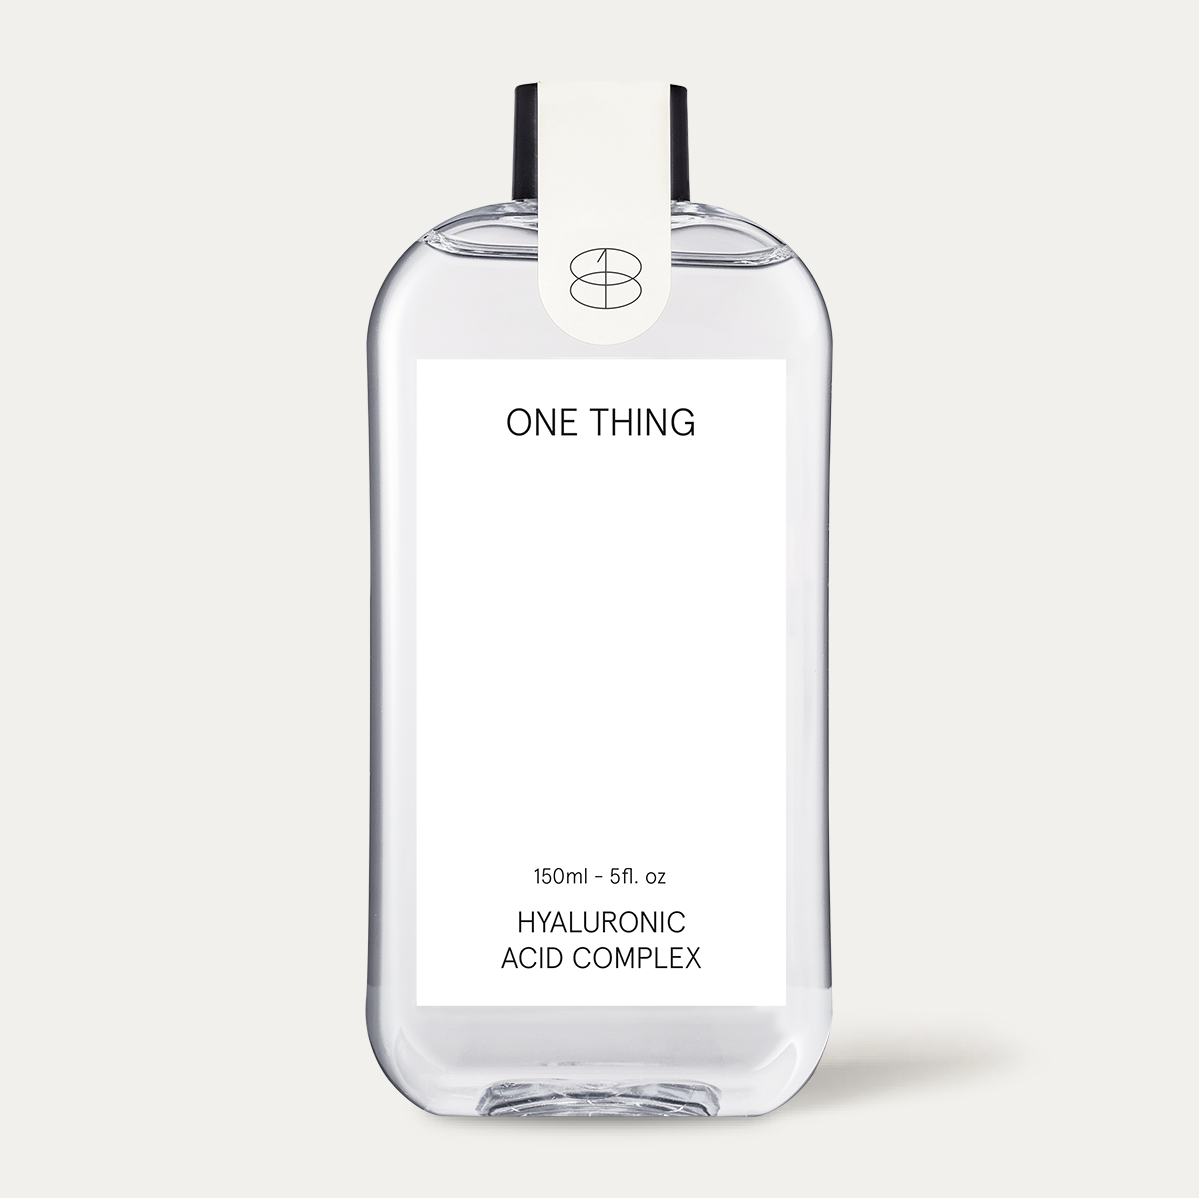 [Onething] Hyaluronic Acid Complex 150ml